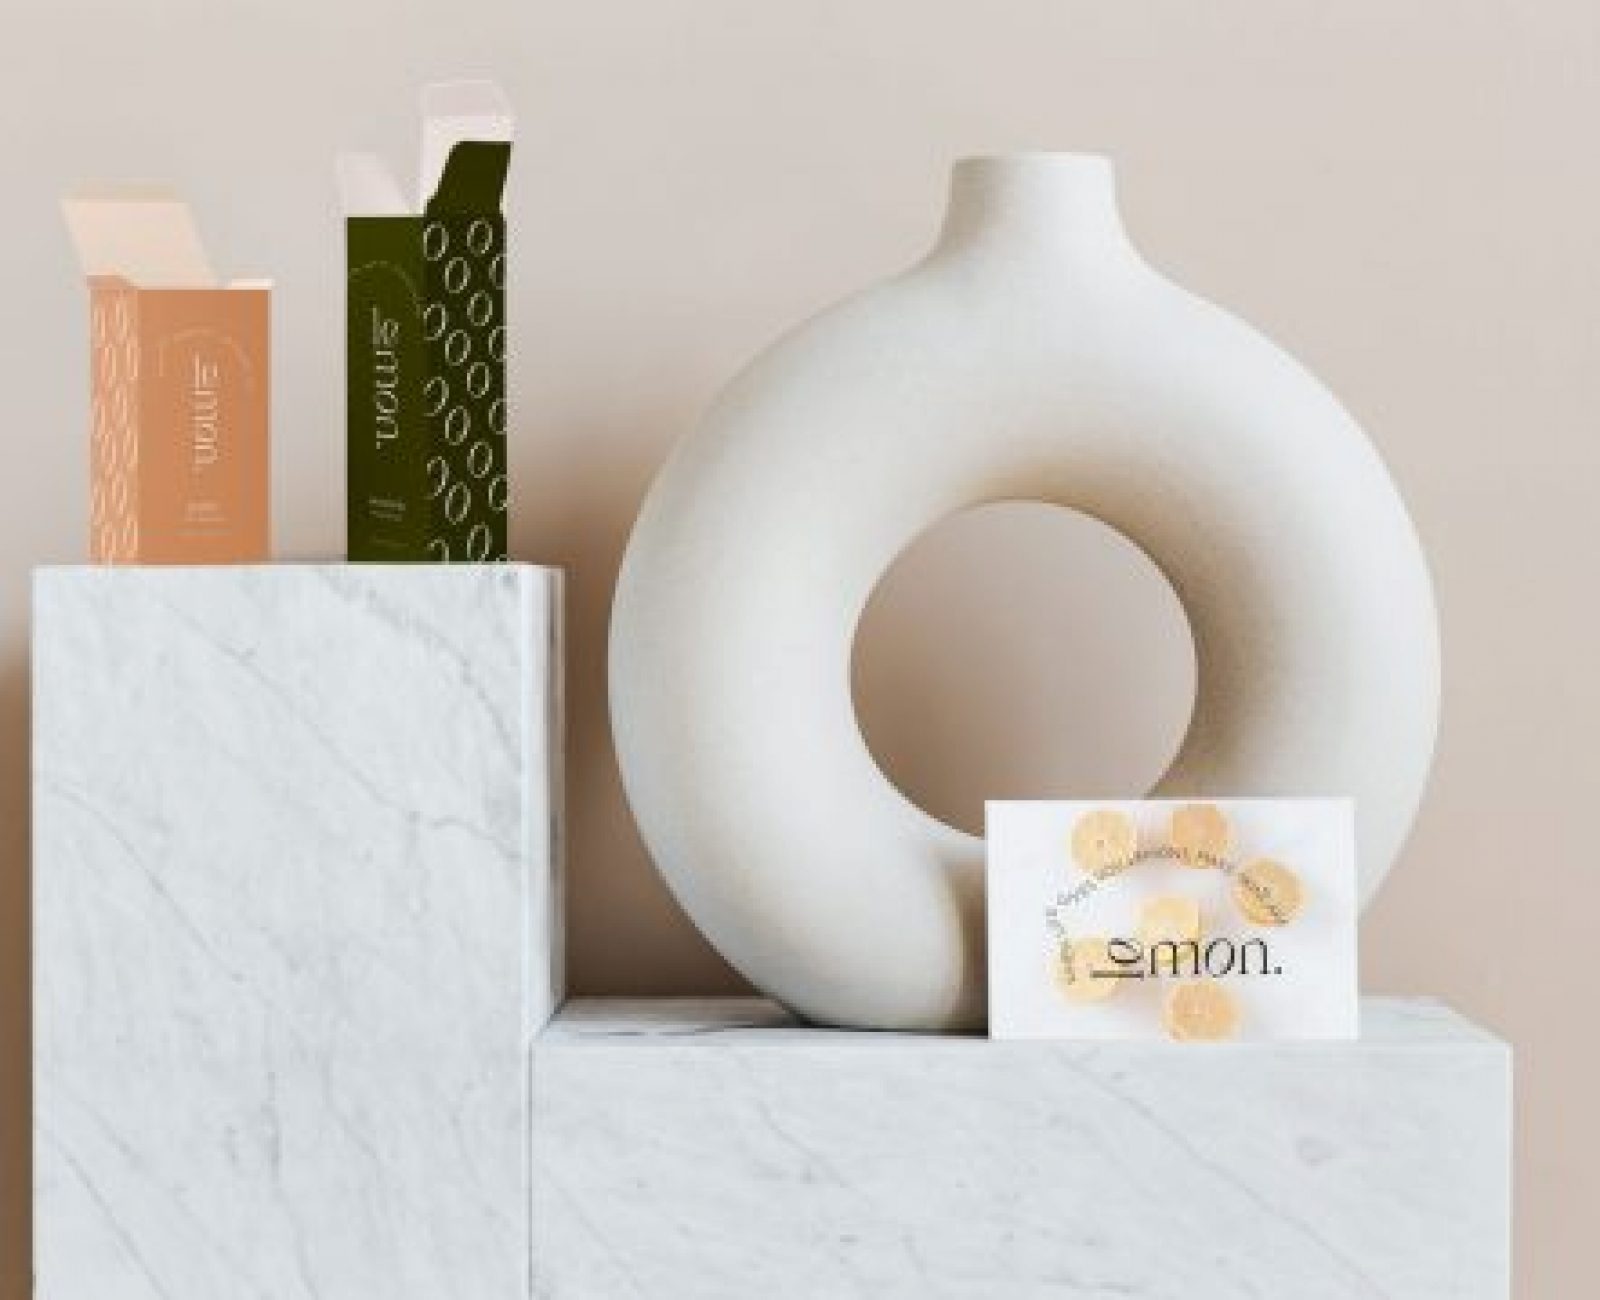 Card-and-Packaging-on-shelf-with-vase-mockup